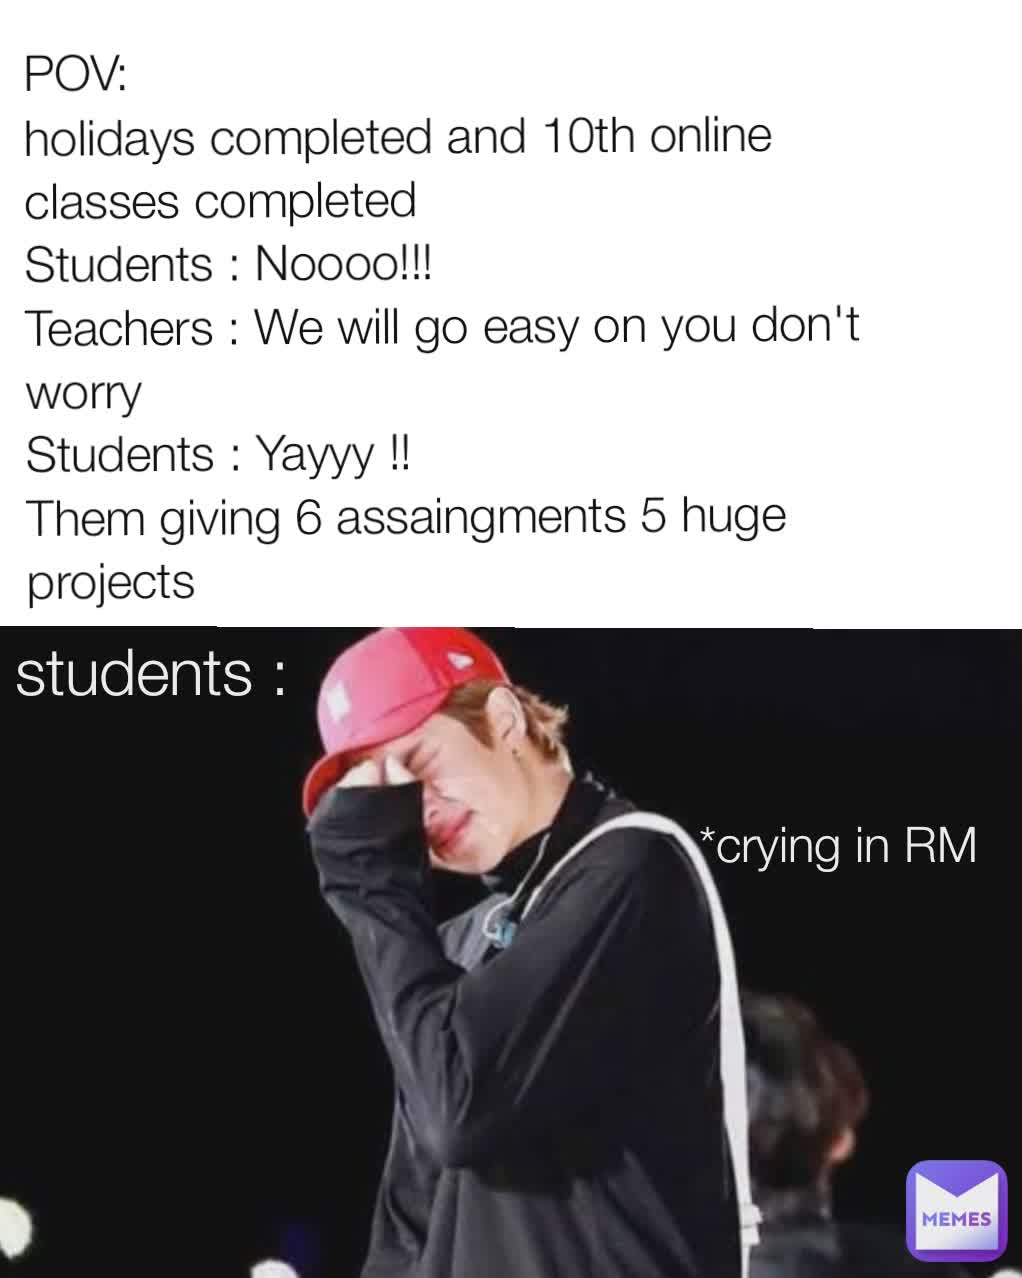 students : *crying in RM POV:
holidays completed and 10th online classes completed 
Students : Noooo!!!
Teachers : We will go easy on you don't worry 
Students : Yayyy !!
Them giving 6 assaingments 5 huge projects 
 students: *crying in RM students : *crying in RM